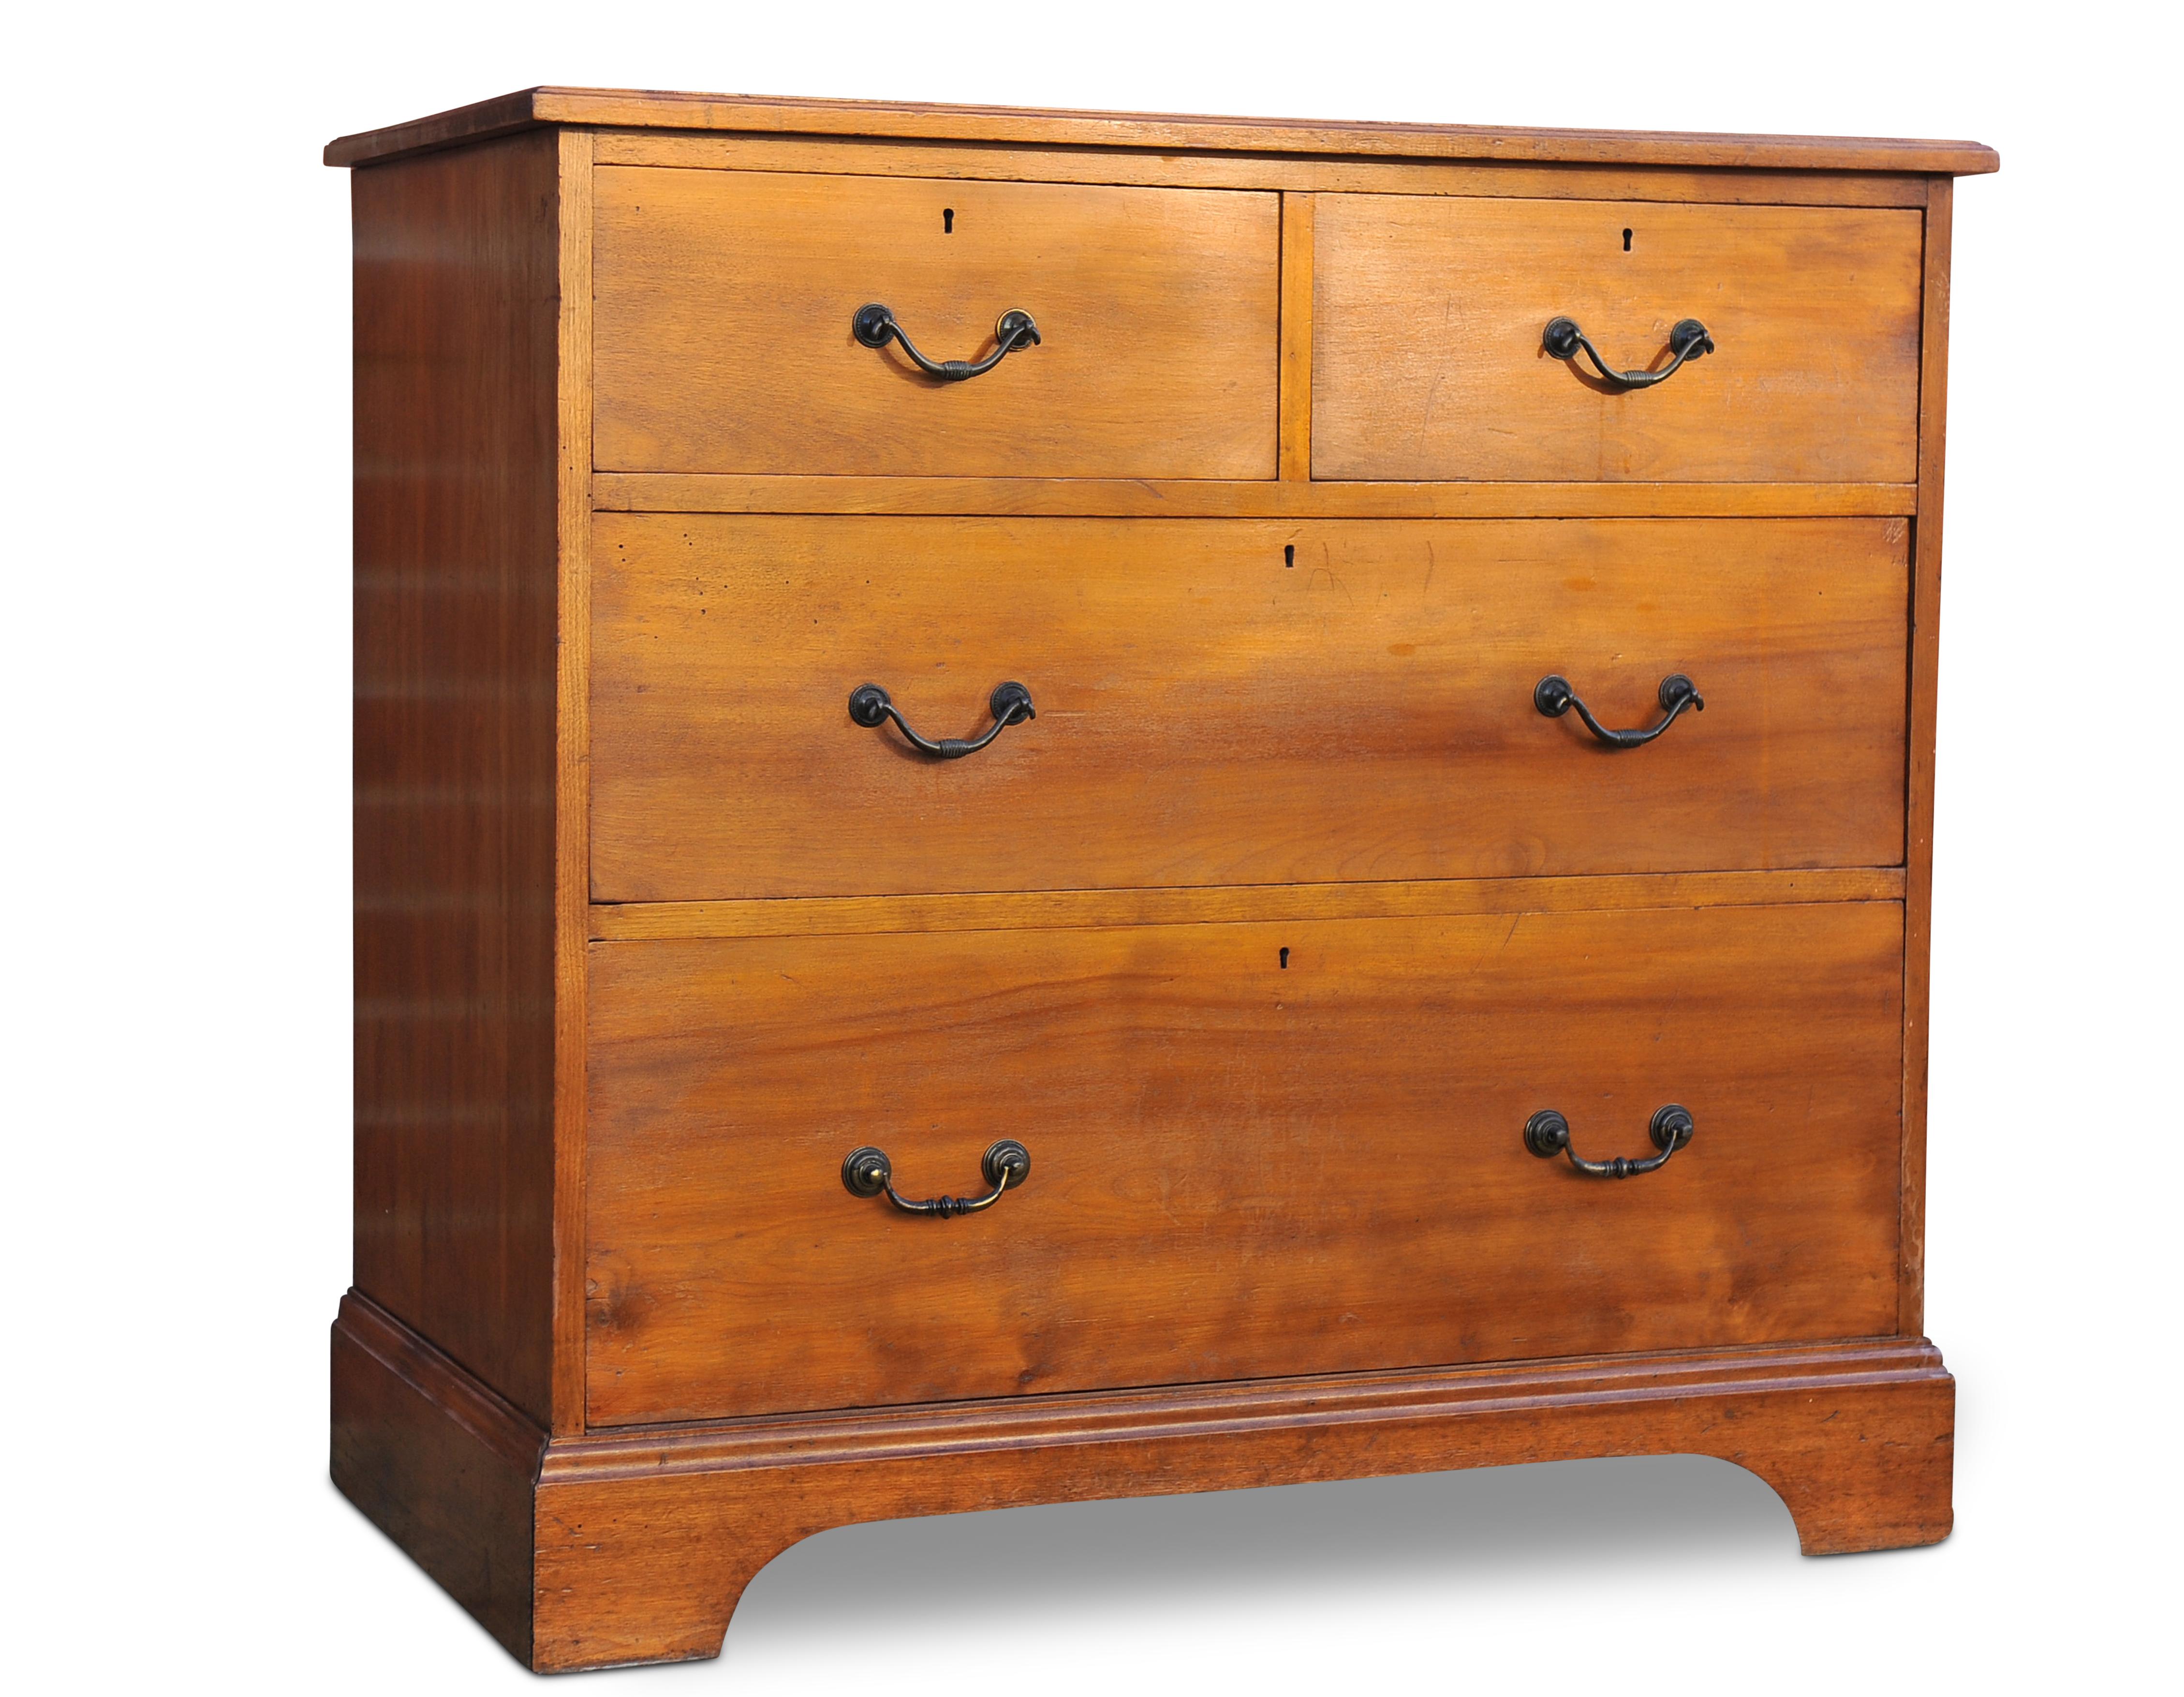 Country Howard & Sons Hand Crafted Cherrywood Dresser / Bureau With Brass Drop Handles  For Sale